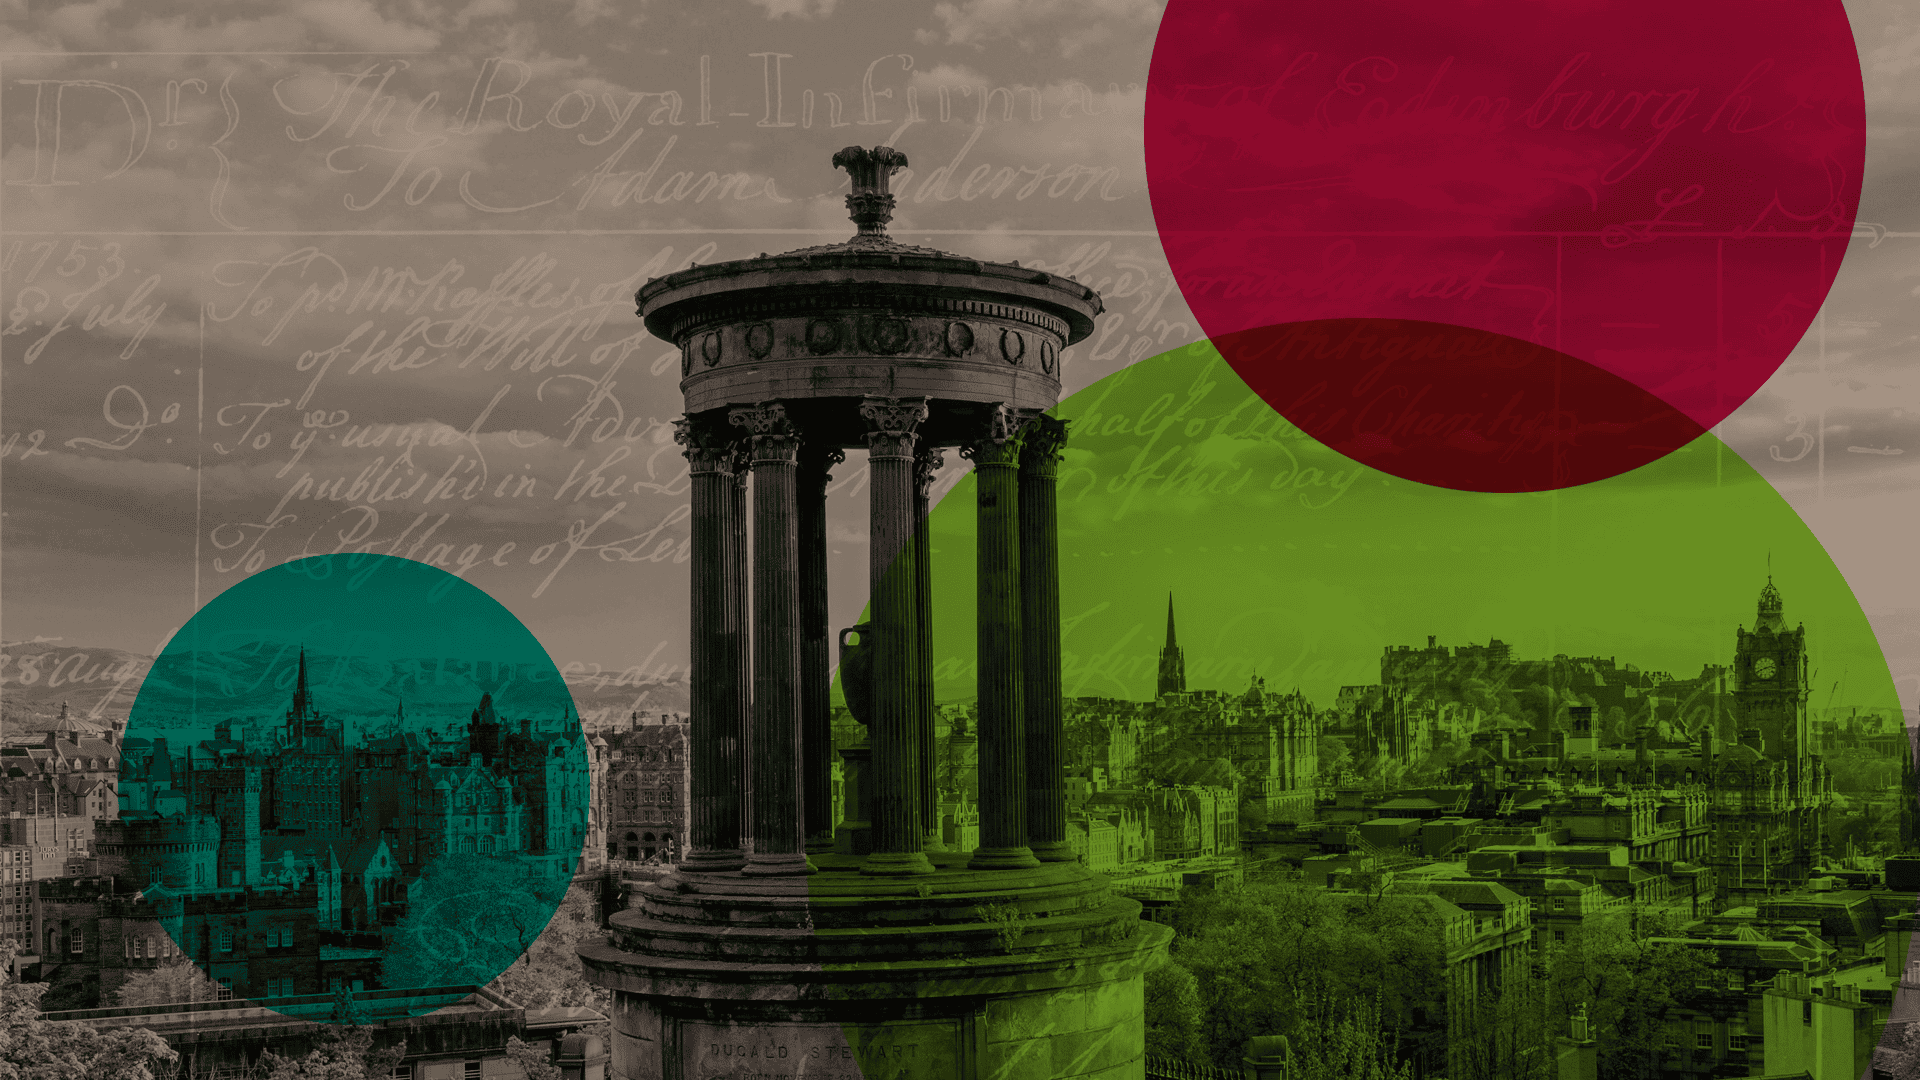 View over Edinburgh Skyline from Calton Hill, with green and red filters over image